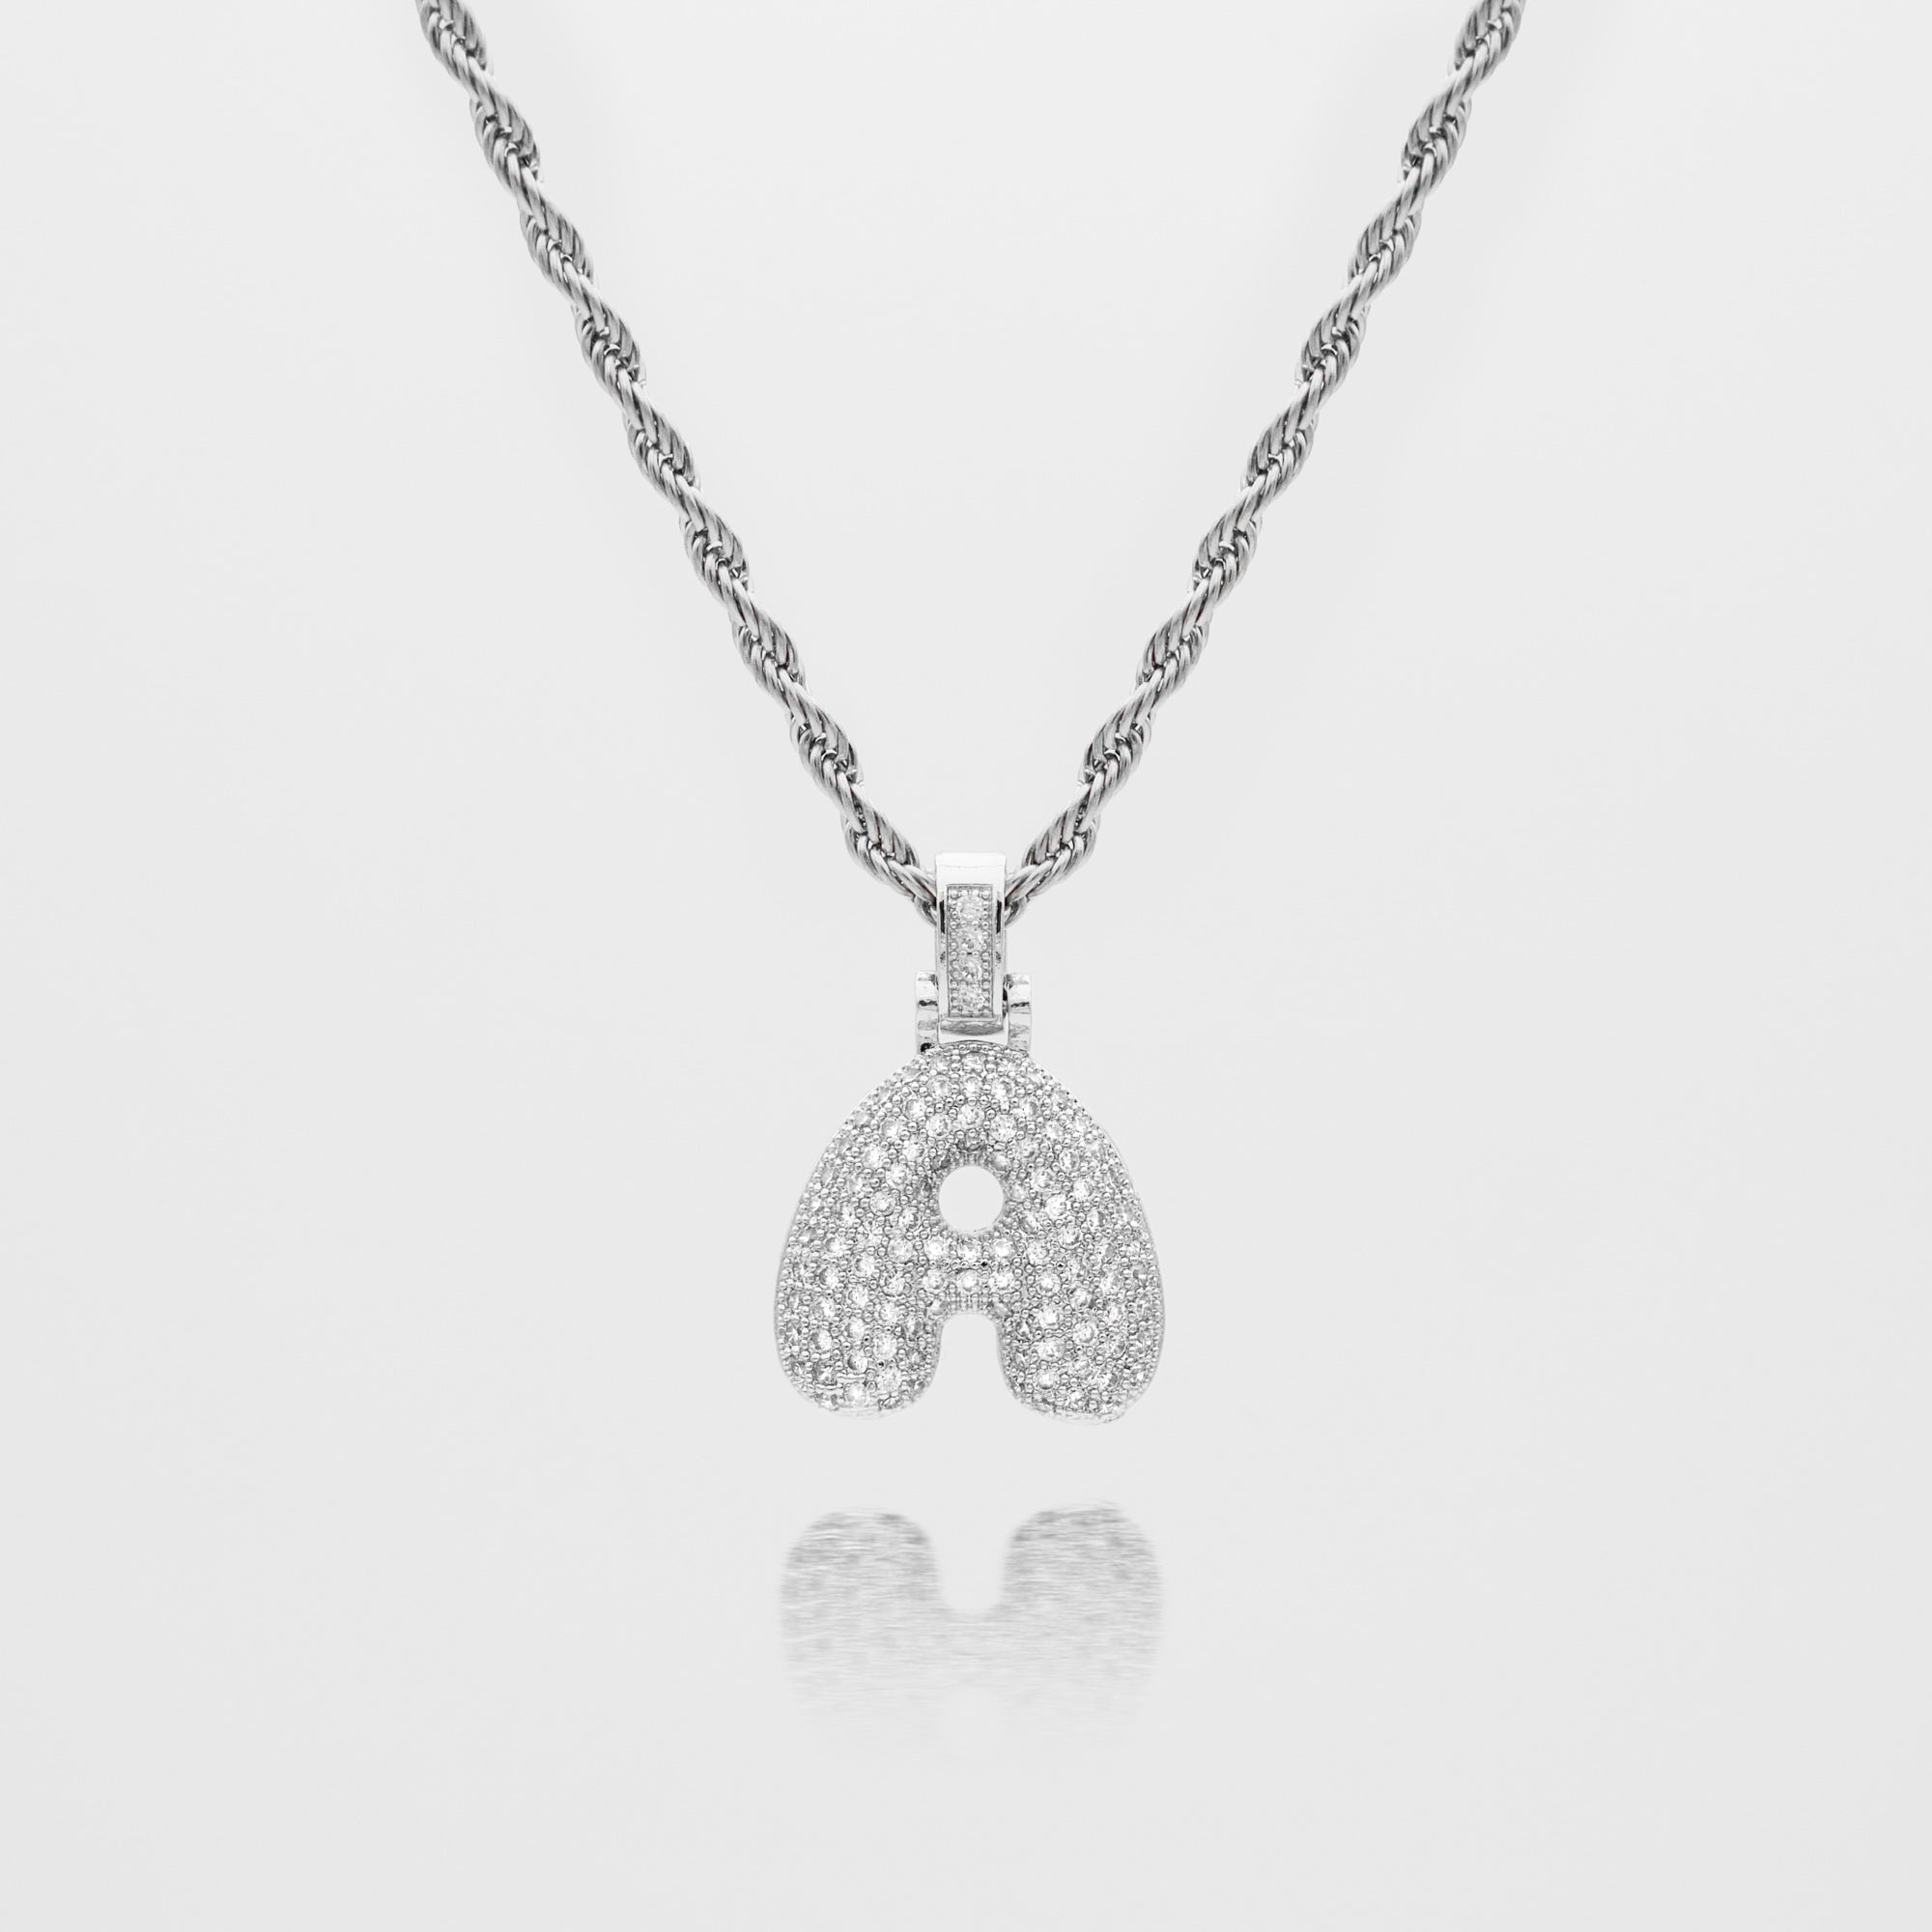 Pave Bubble Letter Initial Necklace encrusted with radiant CZ stones in silver rope chain